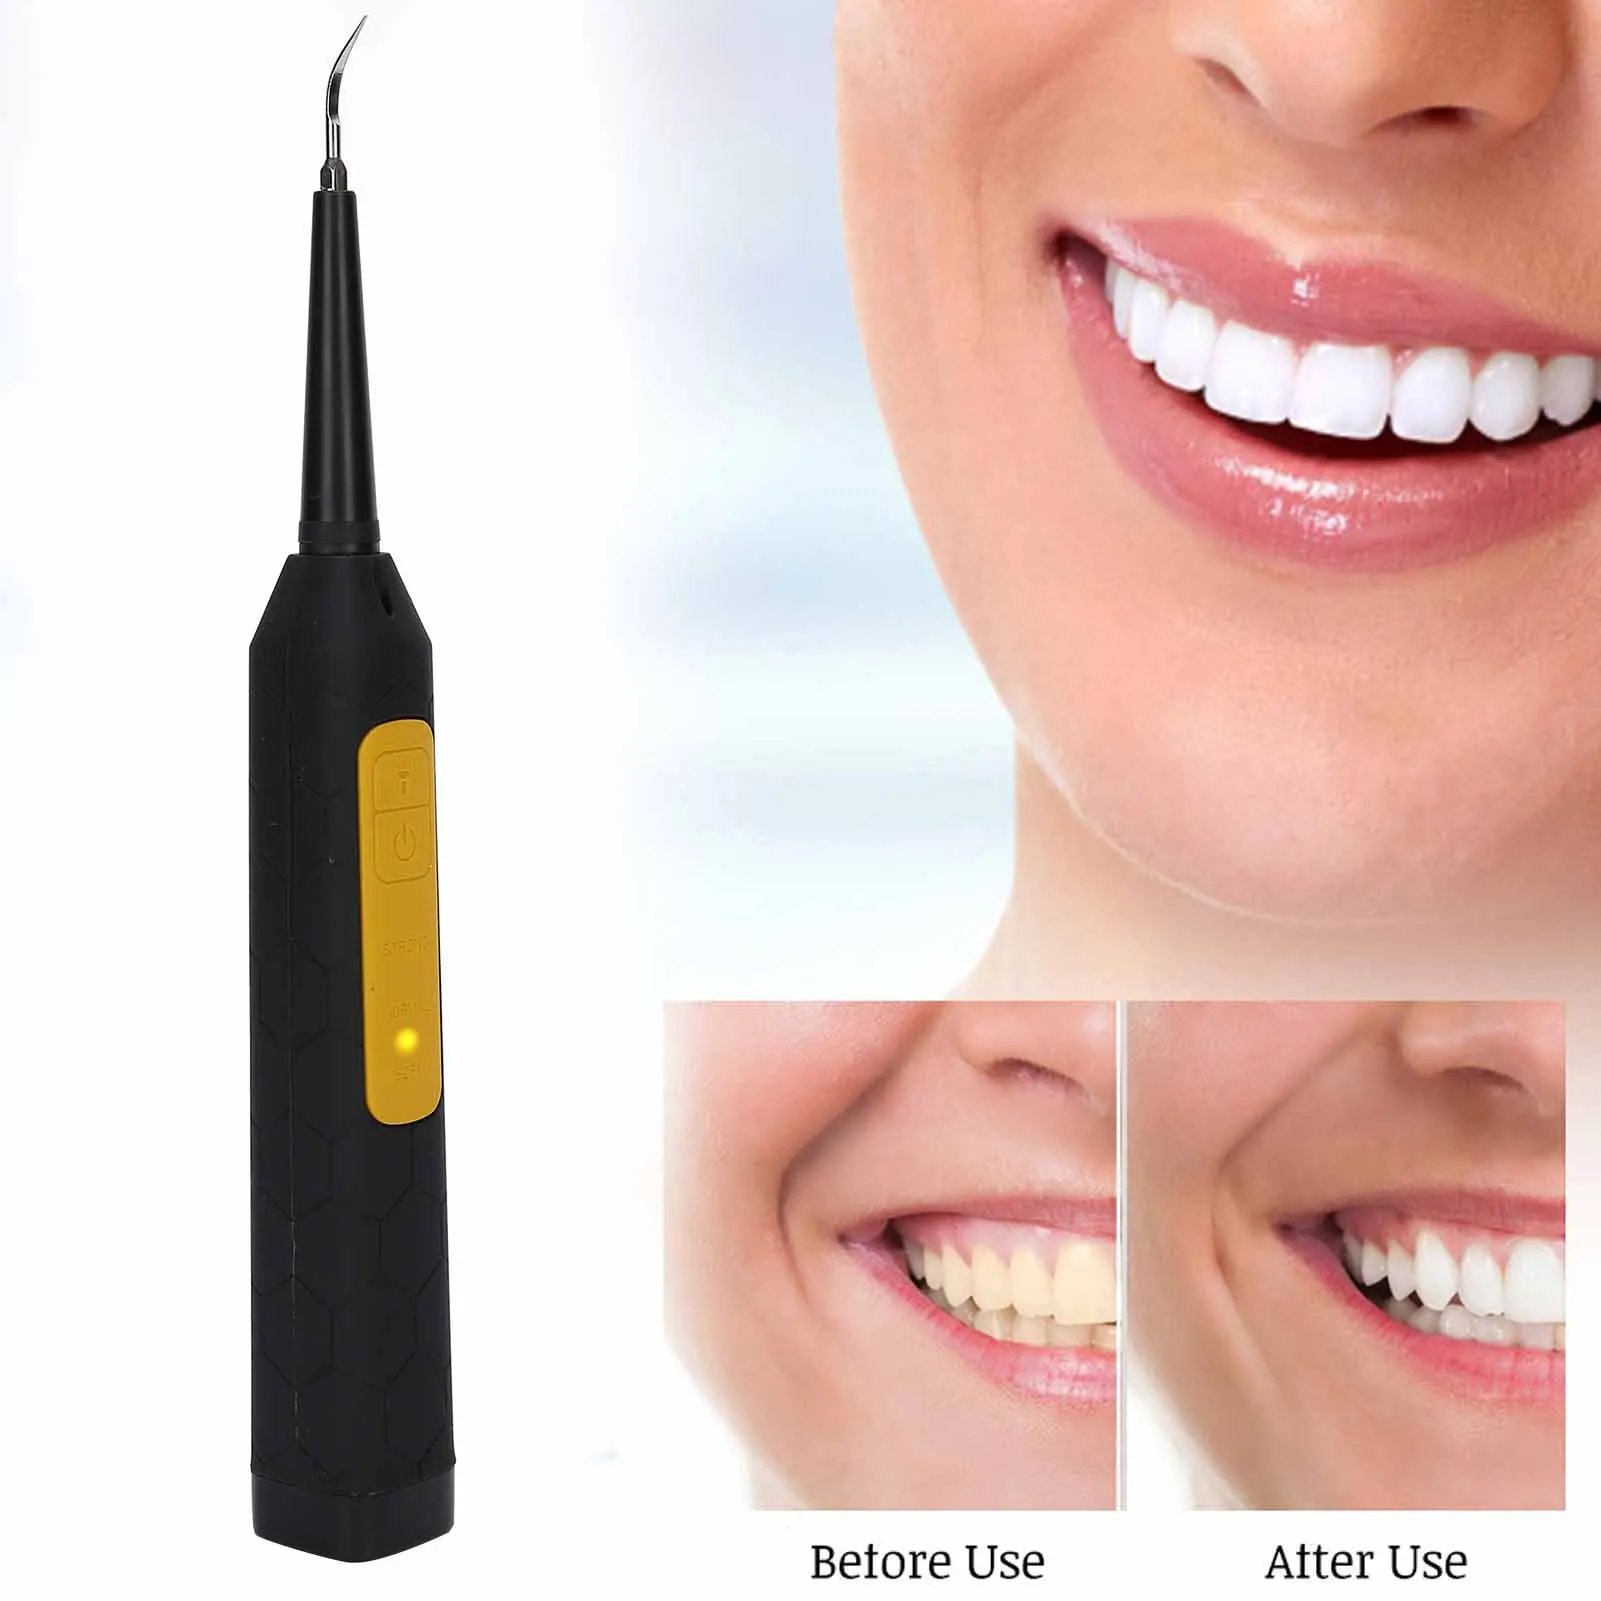 HighQuality Stainless Steel Head Tooth Cleaner Electric Calculus Remover Portable Teeth Tartar Remover Oral Care Tool USB Charg for 3d printer extruder mk7 mk8 mk10 extrusion gear 40 tooth teeth brass or stainless steel drive gear feeding gear wheel